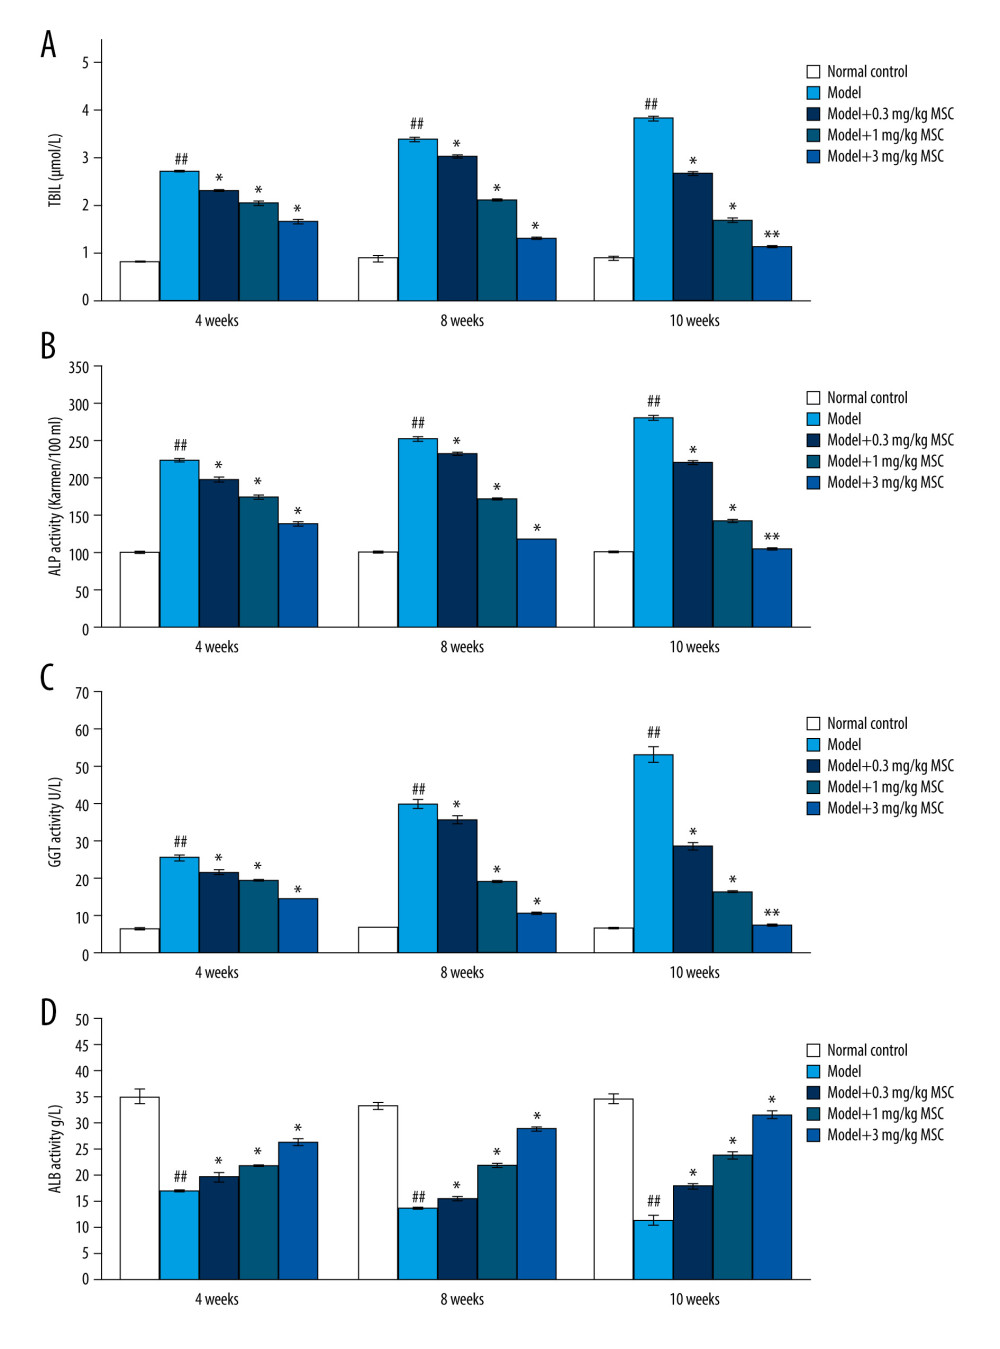 Se-methylselenocysteine (MSC) treatments improved liver functions by modulating levels of (A) total bilirubin, (B) alkaline phosphatase, (C) γ-glutamyl transpeptidase, and (D) albumin in serum of rats in different groups. ## P<0.01 vs Normal control group. * P<0.05 and ** P<0.01 vs Model group.